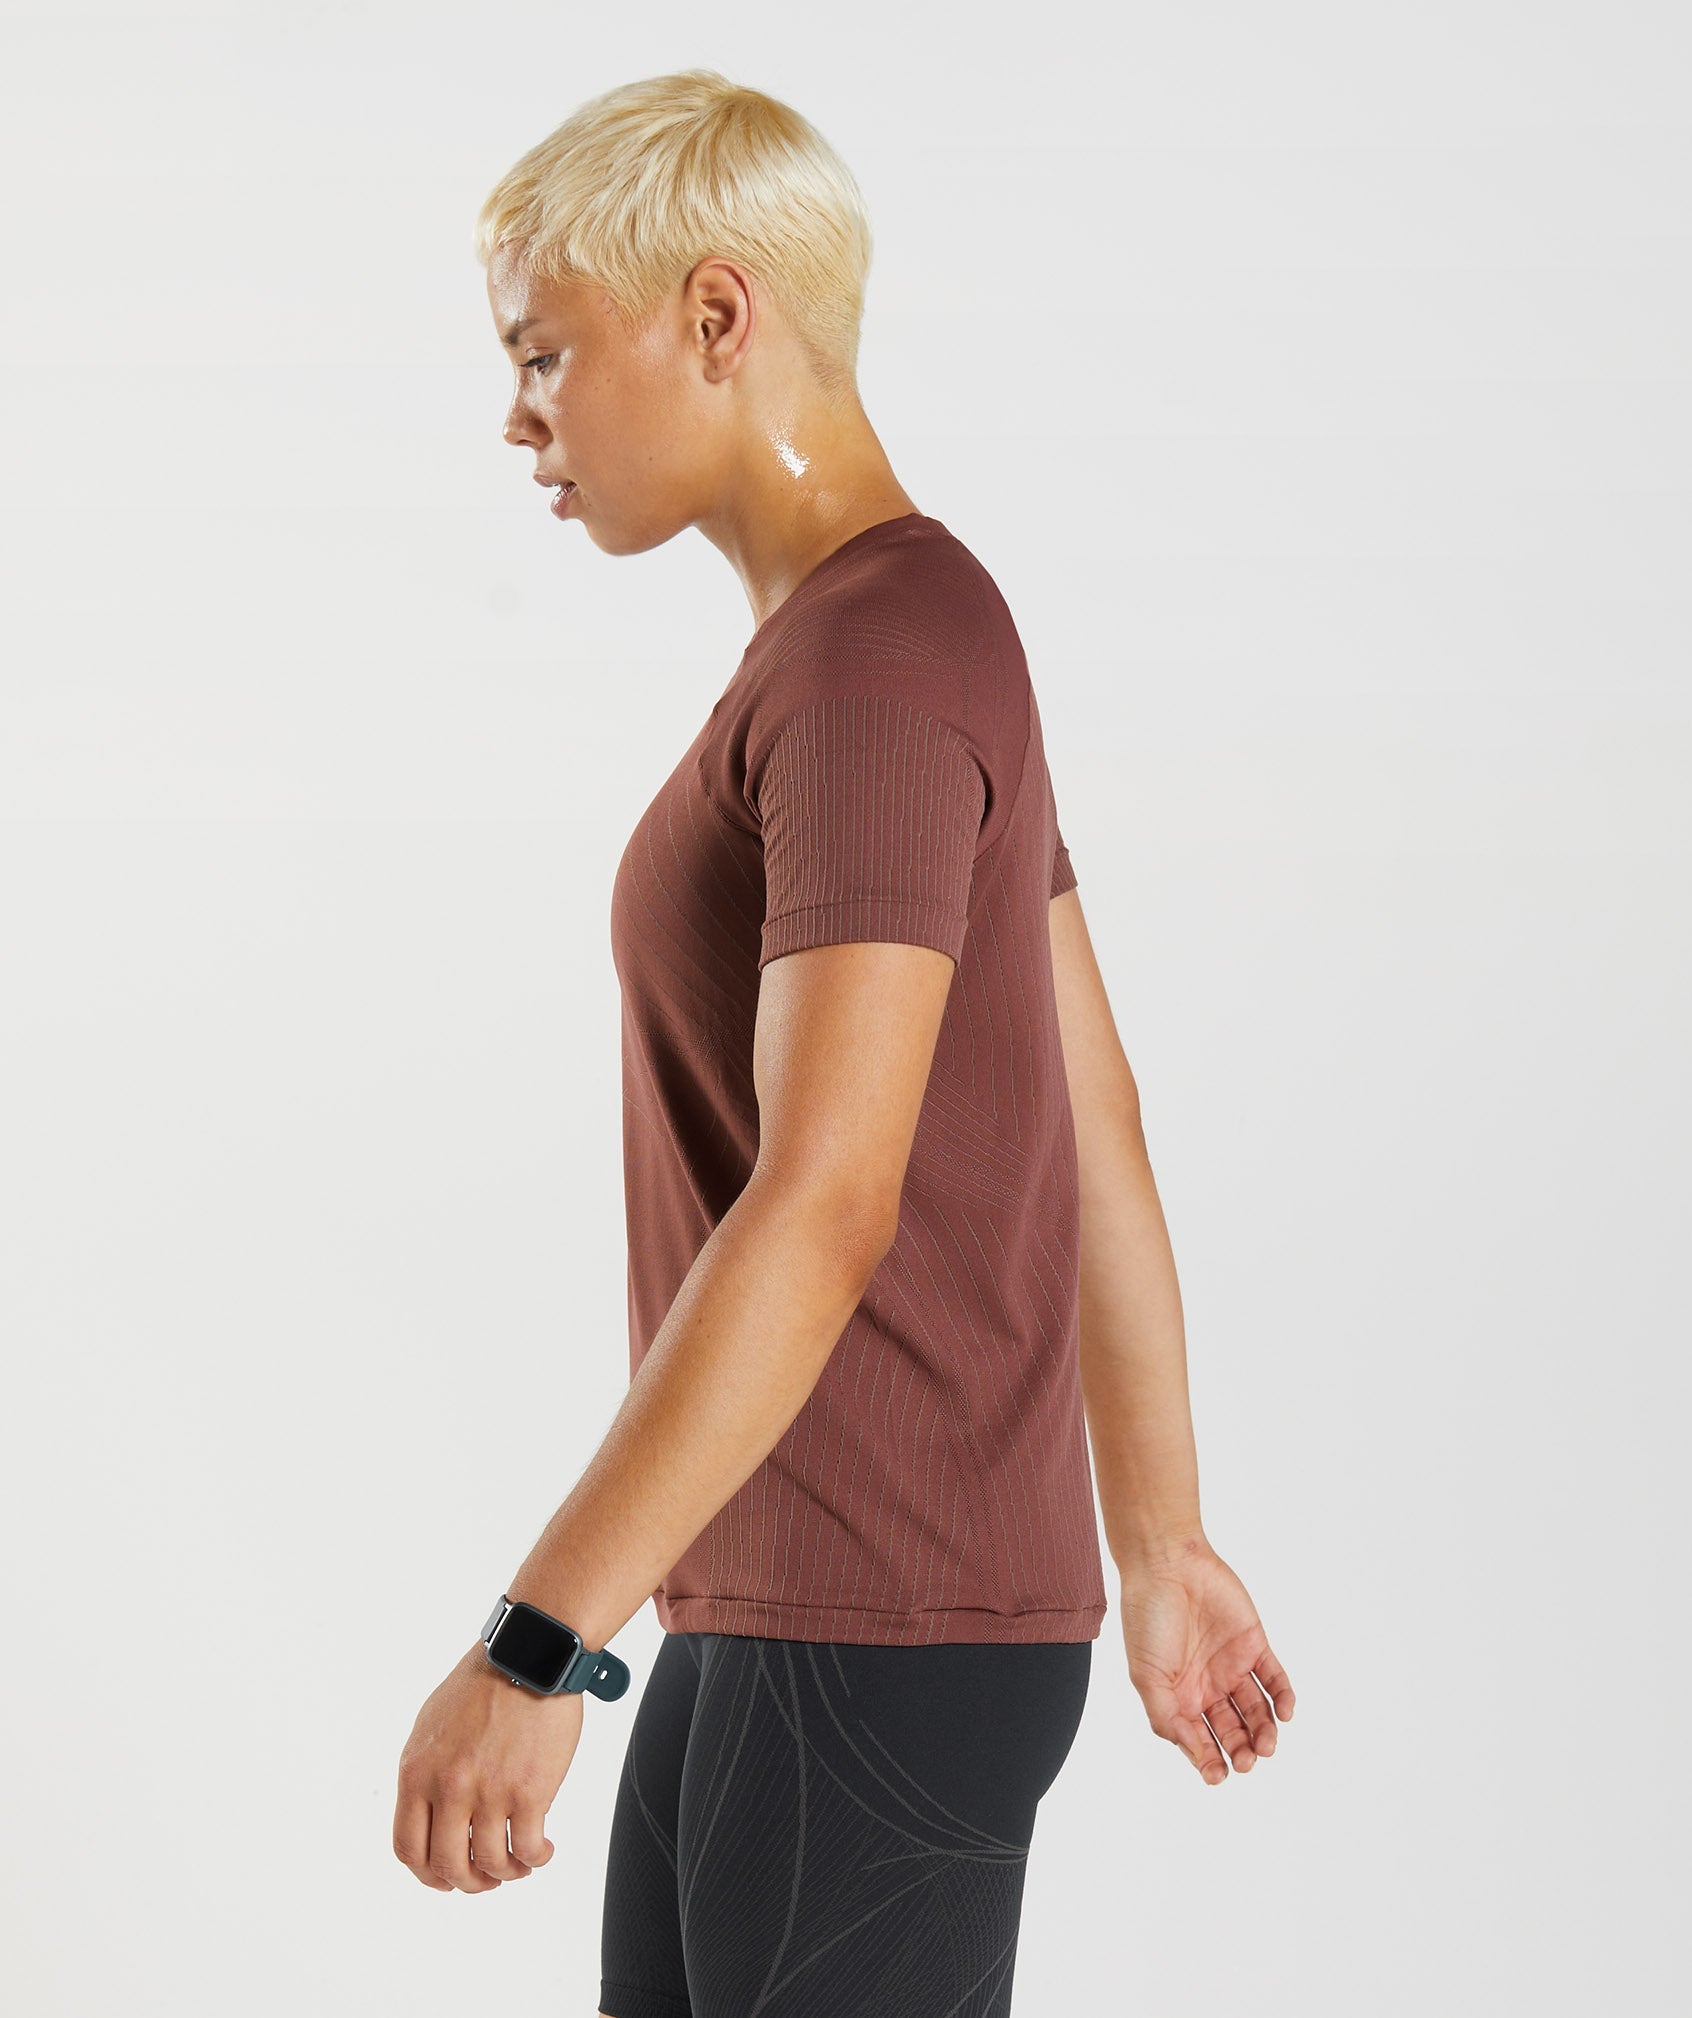 Apex Seamless Top in Cherry Brown/Truffle Brown - view 3